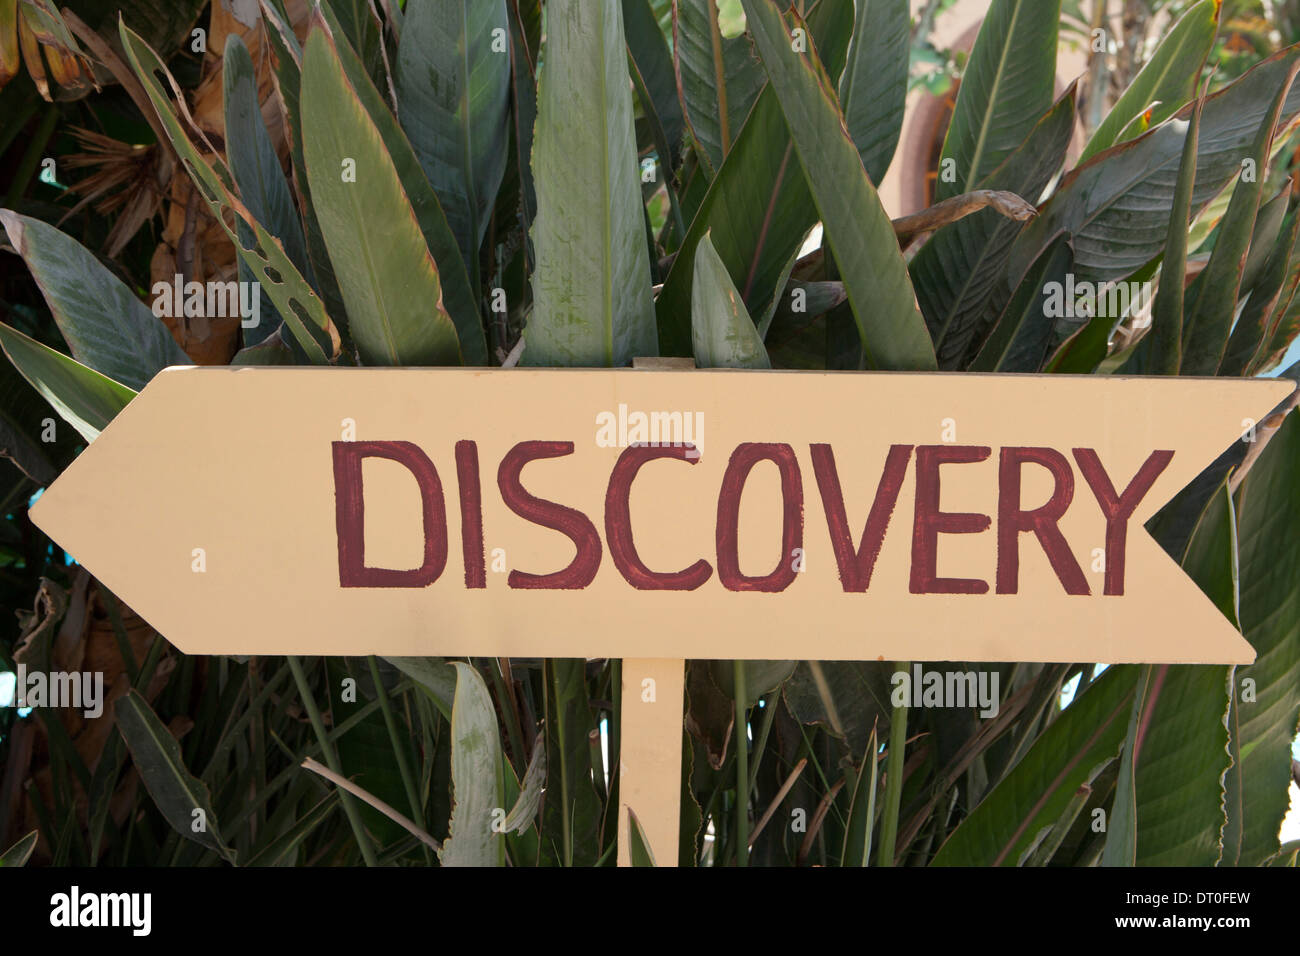 Discovery sign in garden Stock Photo